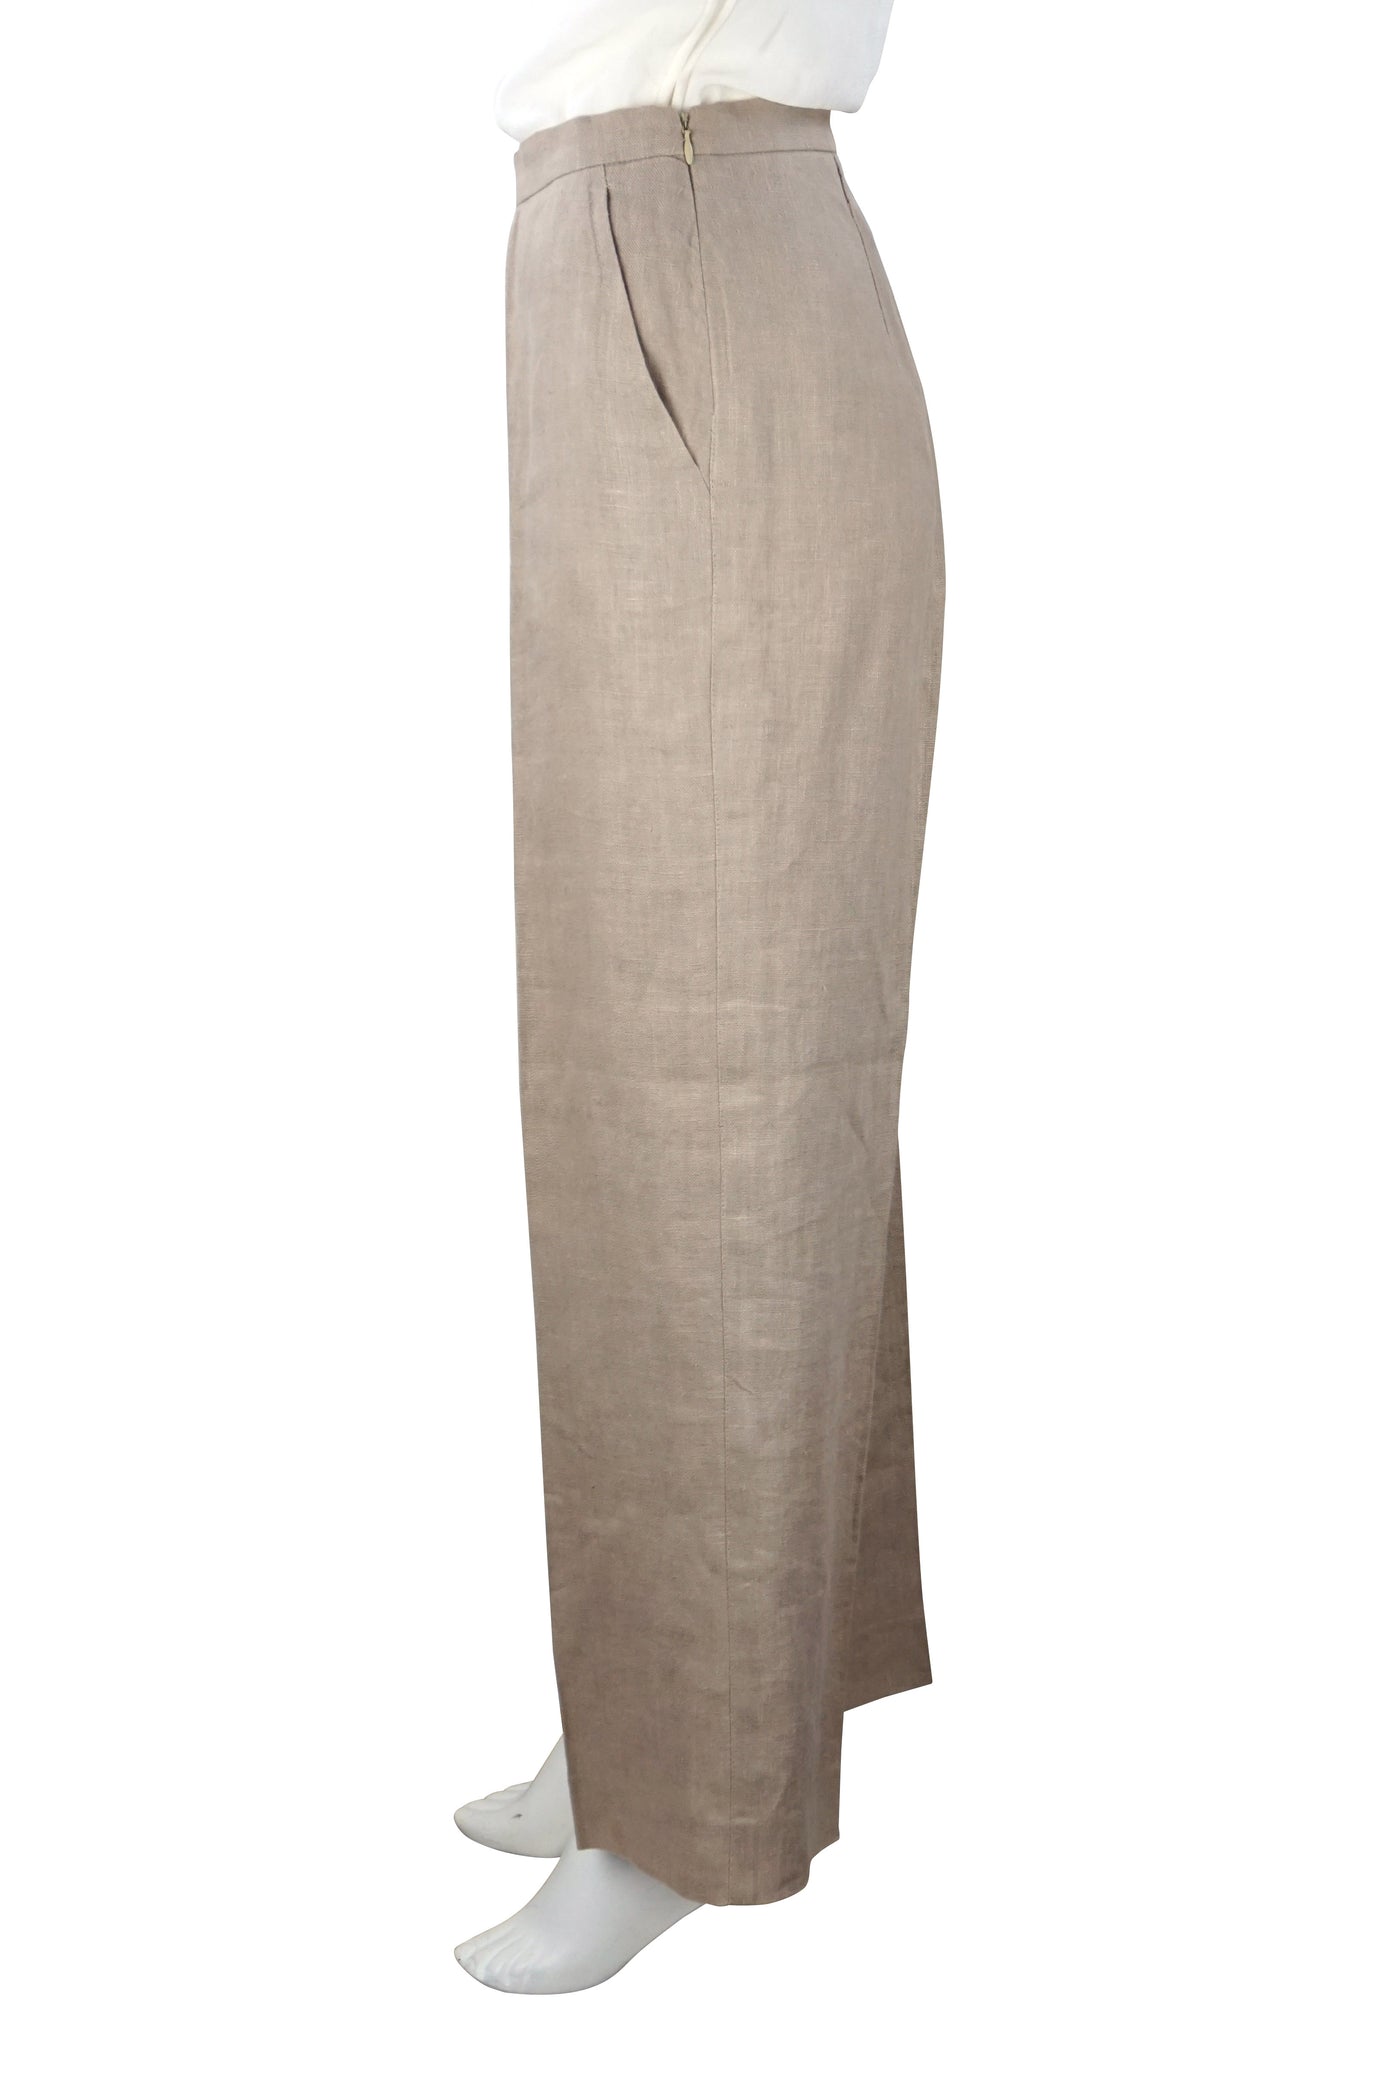 Pure linen trousers